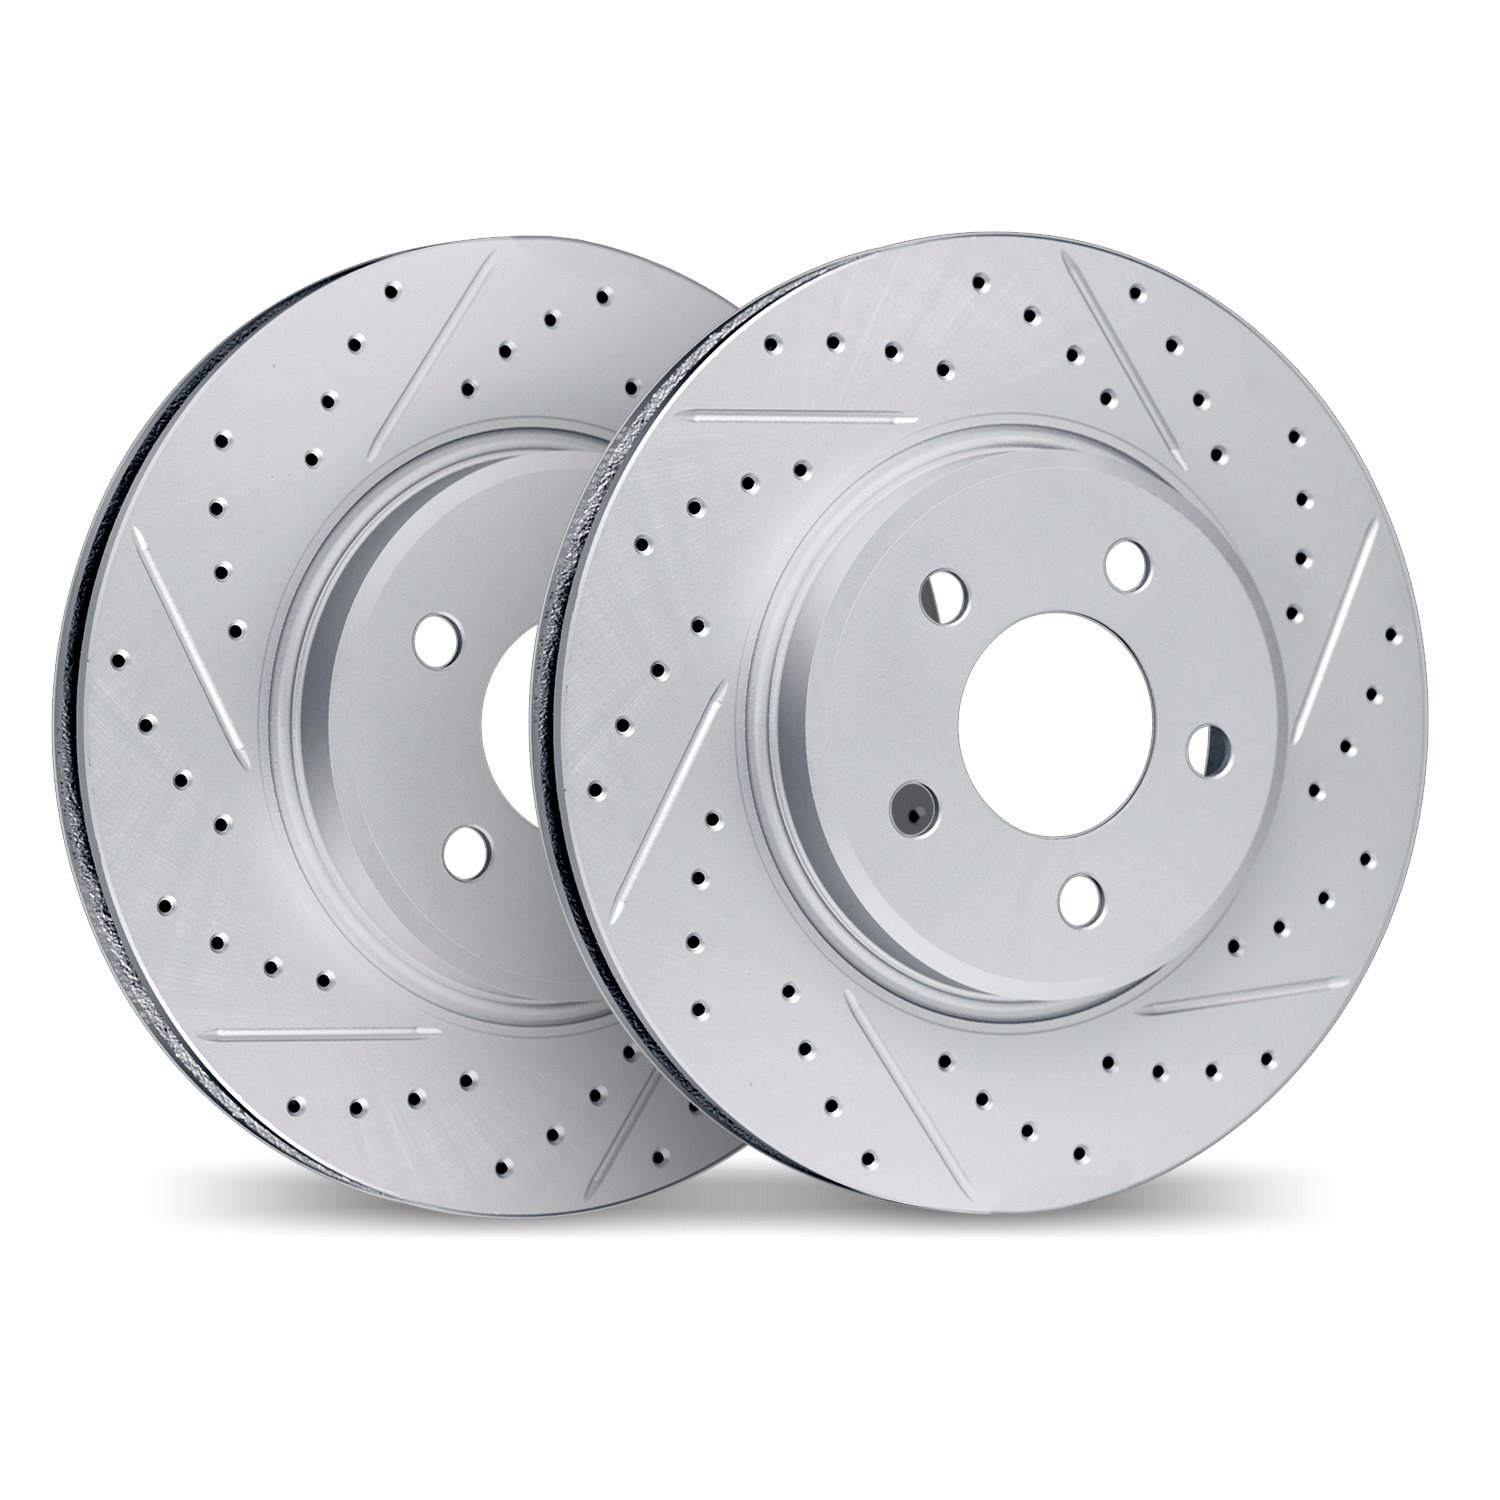 2002-11020 Geoperformance Drilled/Slotted Brake Rotors, 2018-2020 Land Rover, Position: Rear